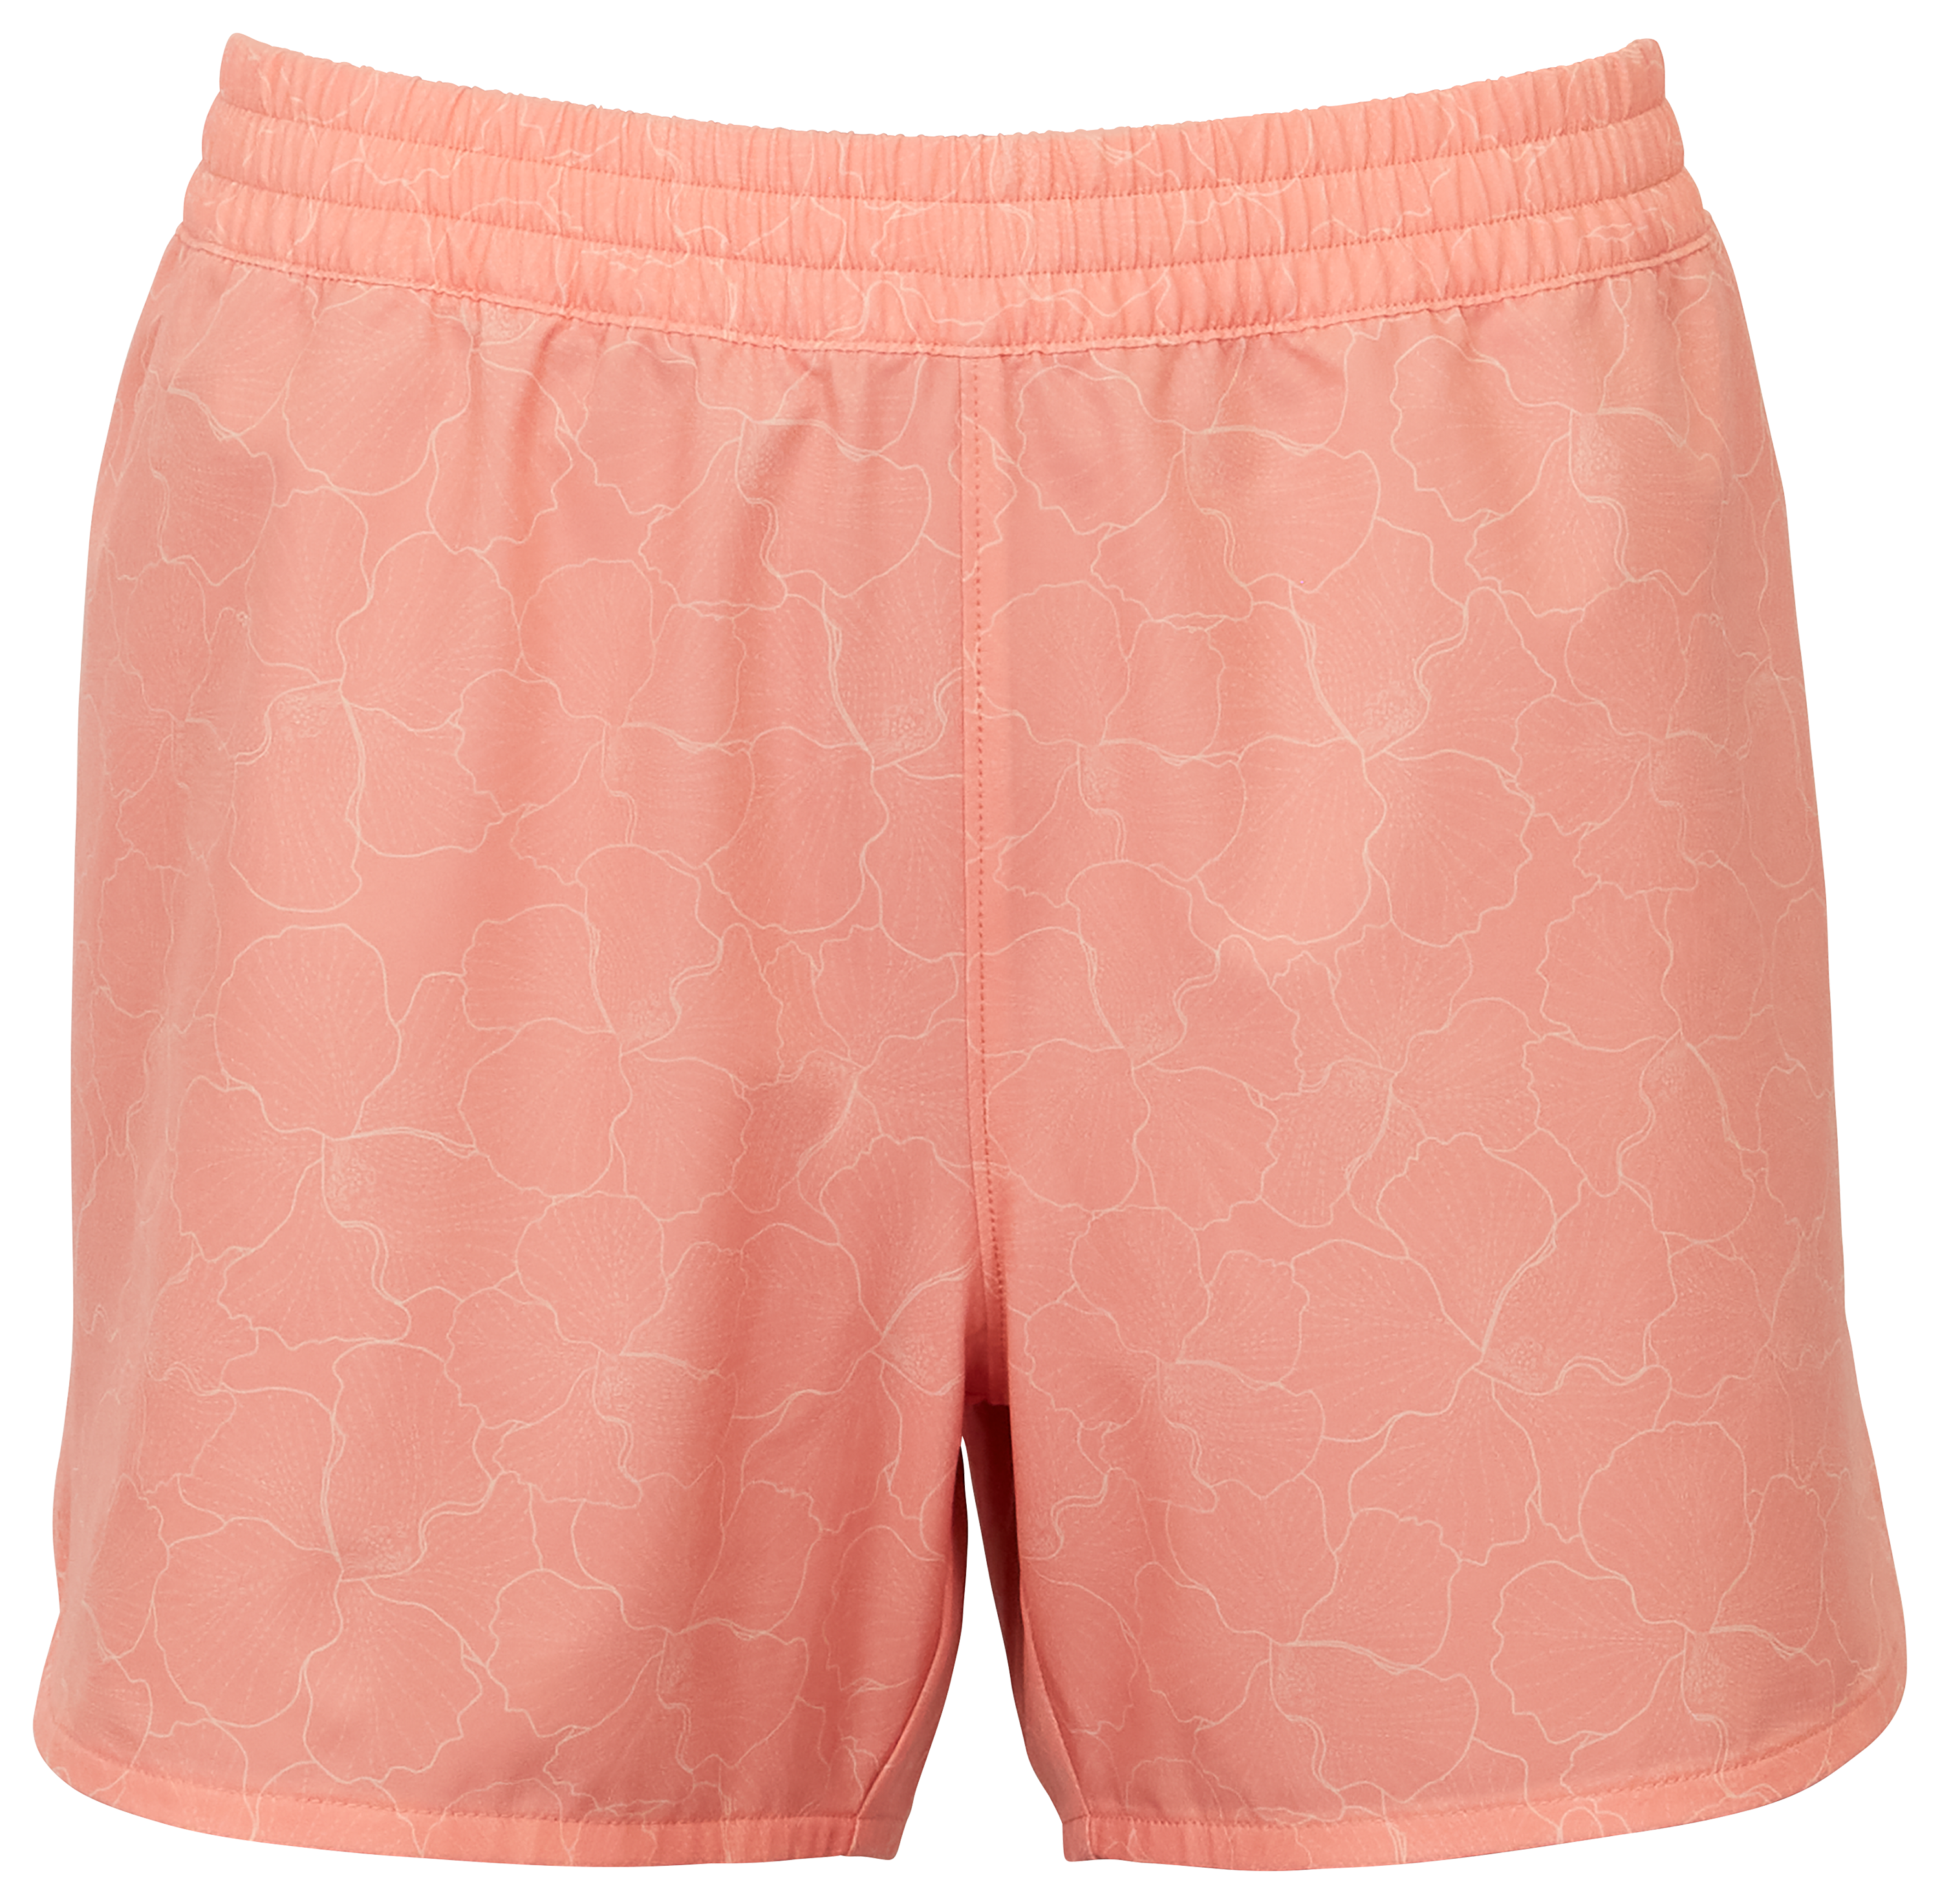 World Wide Sportsman Charter Print Pull-On Shorts for Ladies - Candlelight Hibicus - L